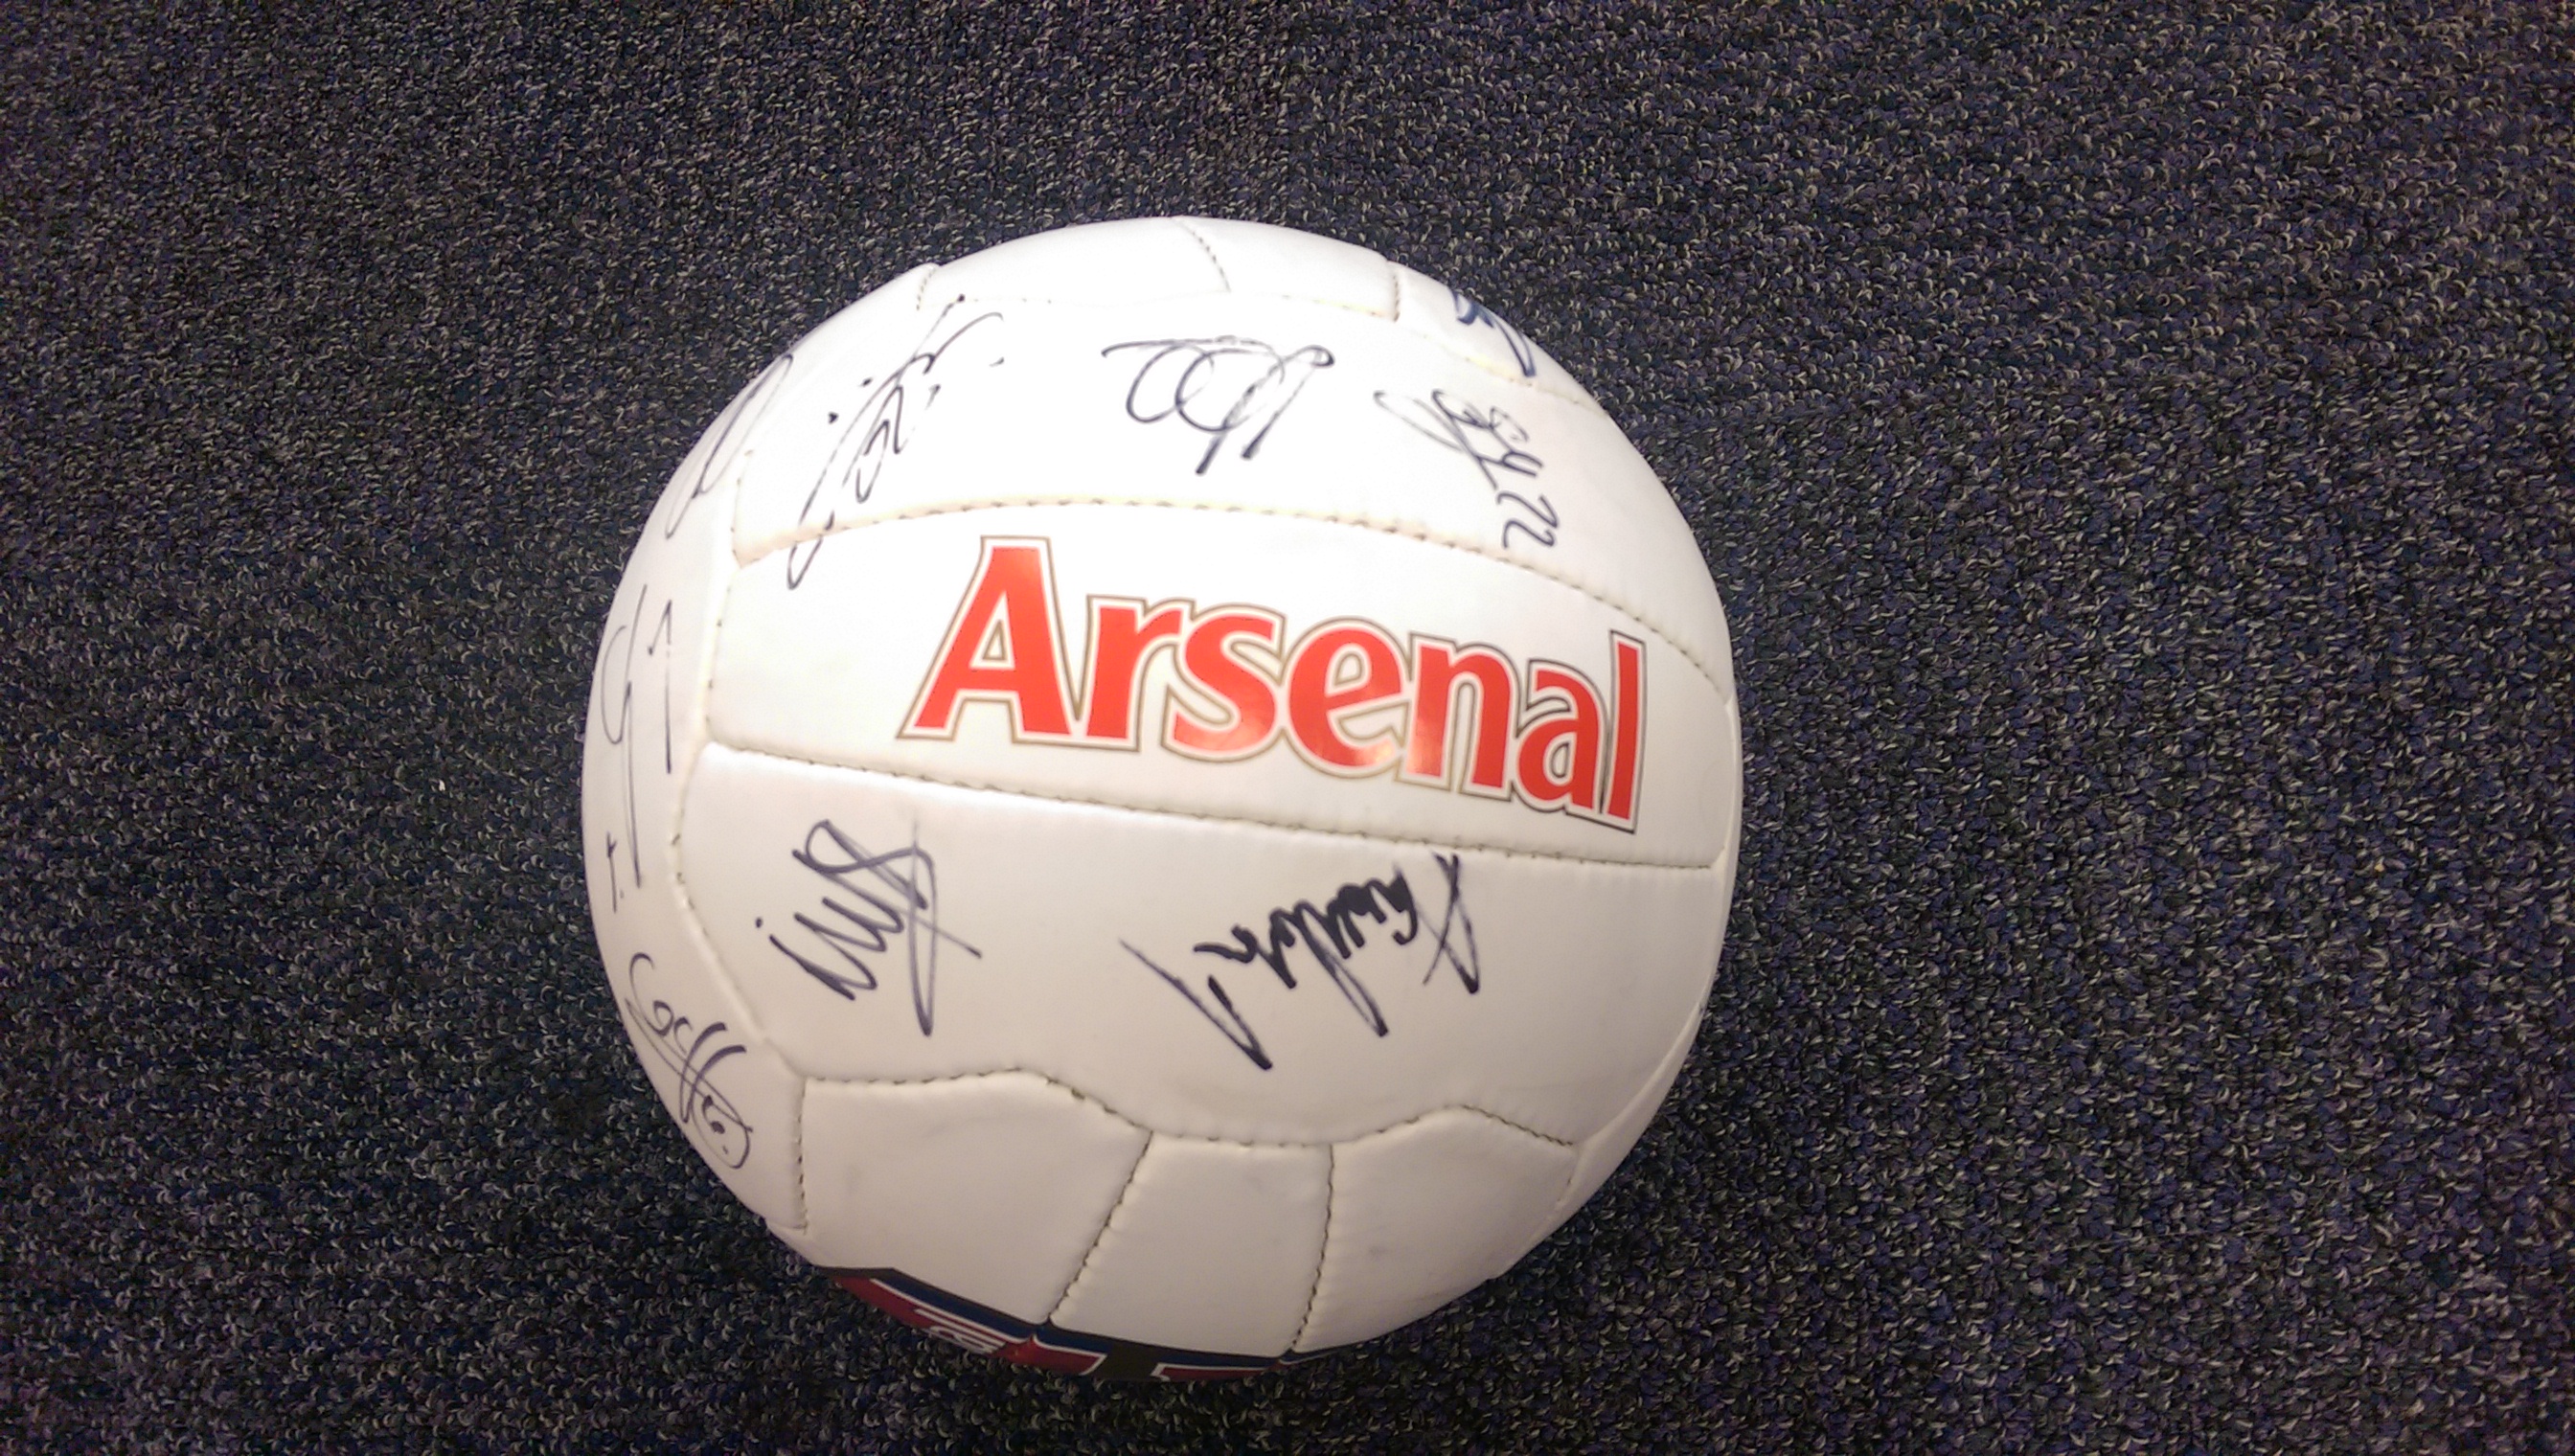 Signed Arsenal football.  A football signed by the 2014/15 Arsenal Football team has been kindly